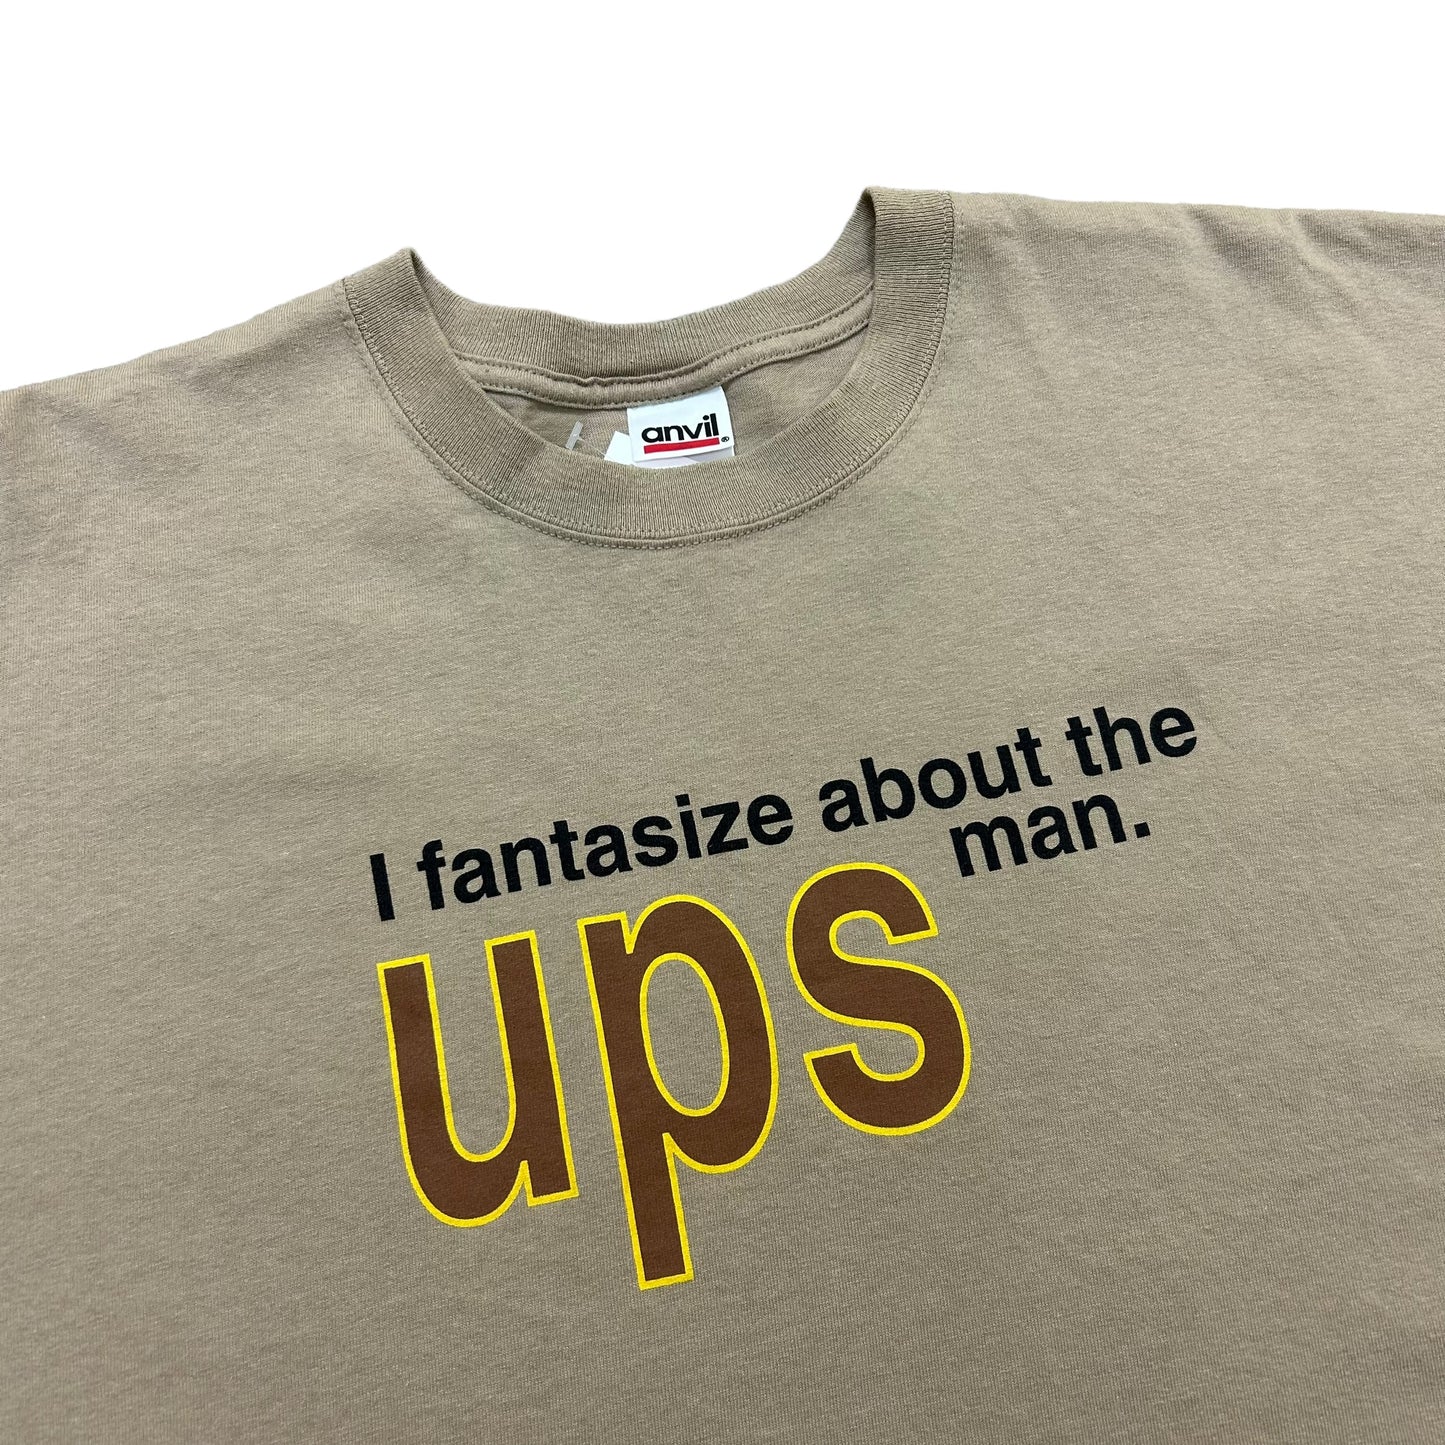 Y2K “I Fantasize About The UPS Man” Tan Graphic T-Shirt - Size Large